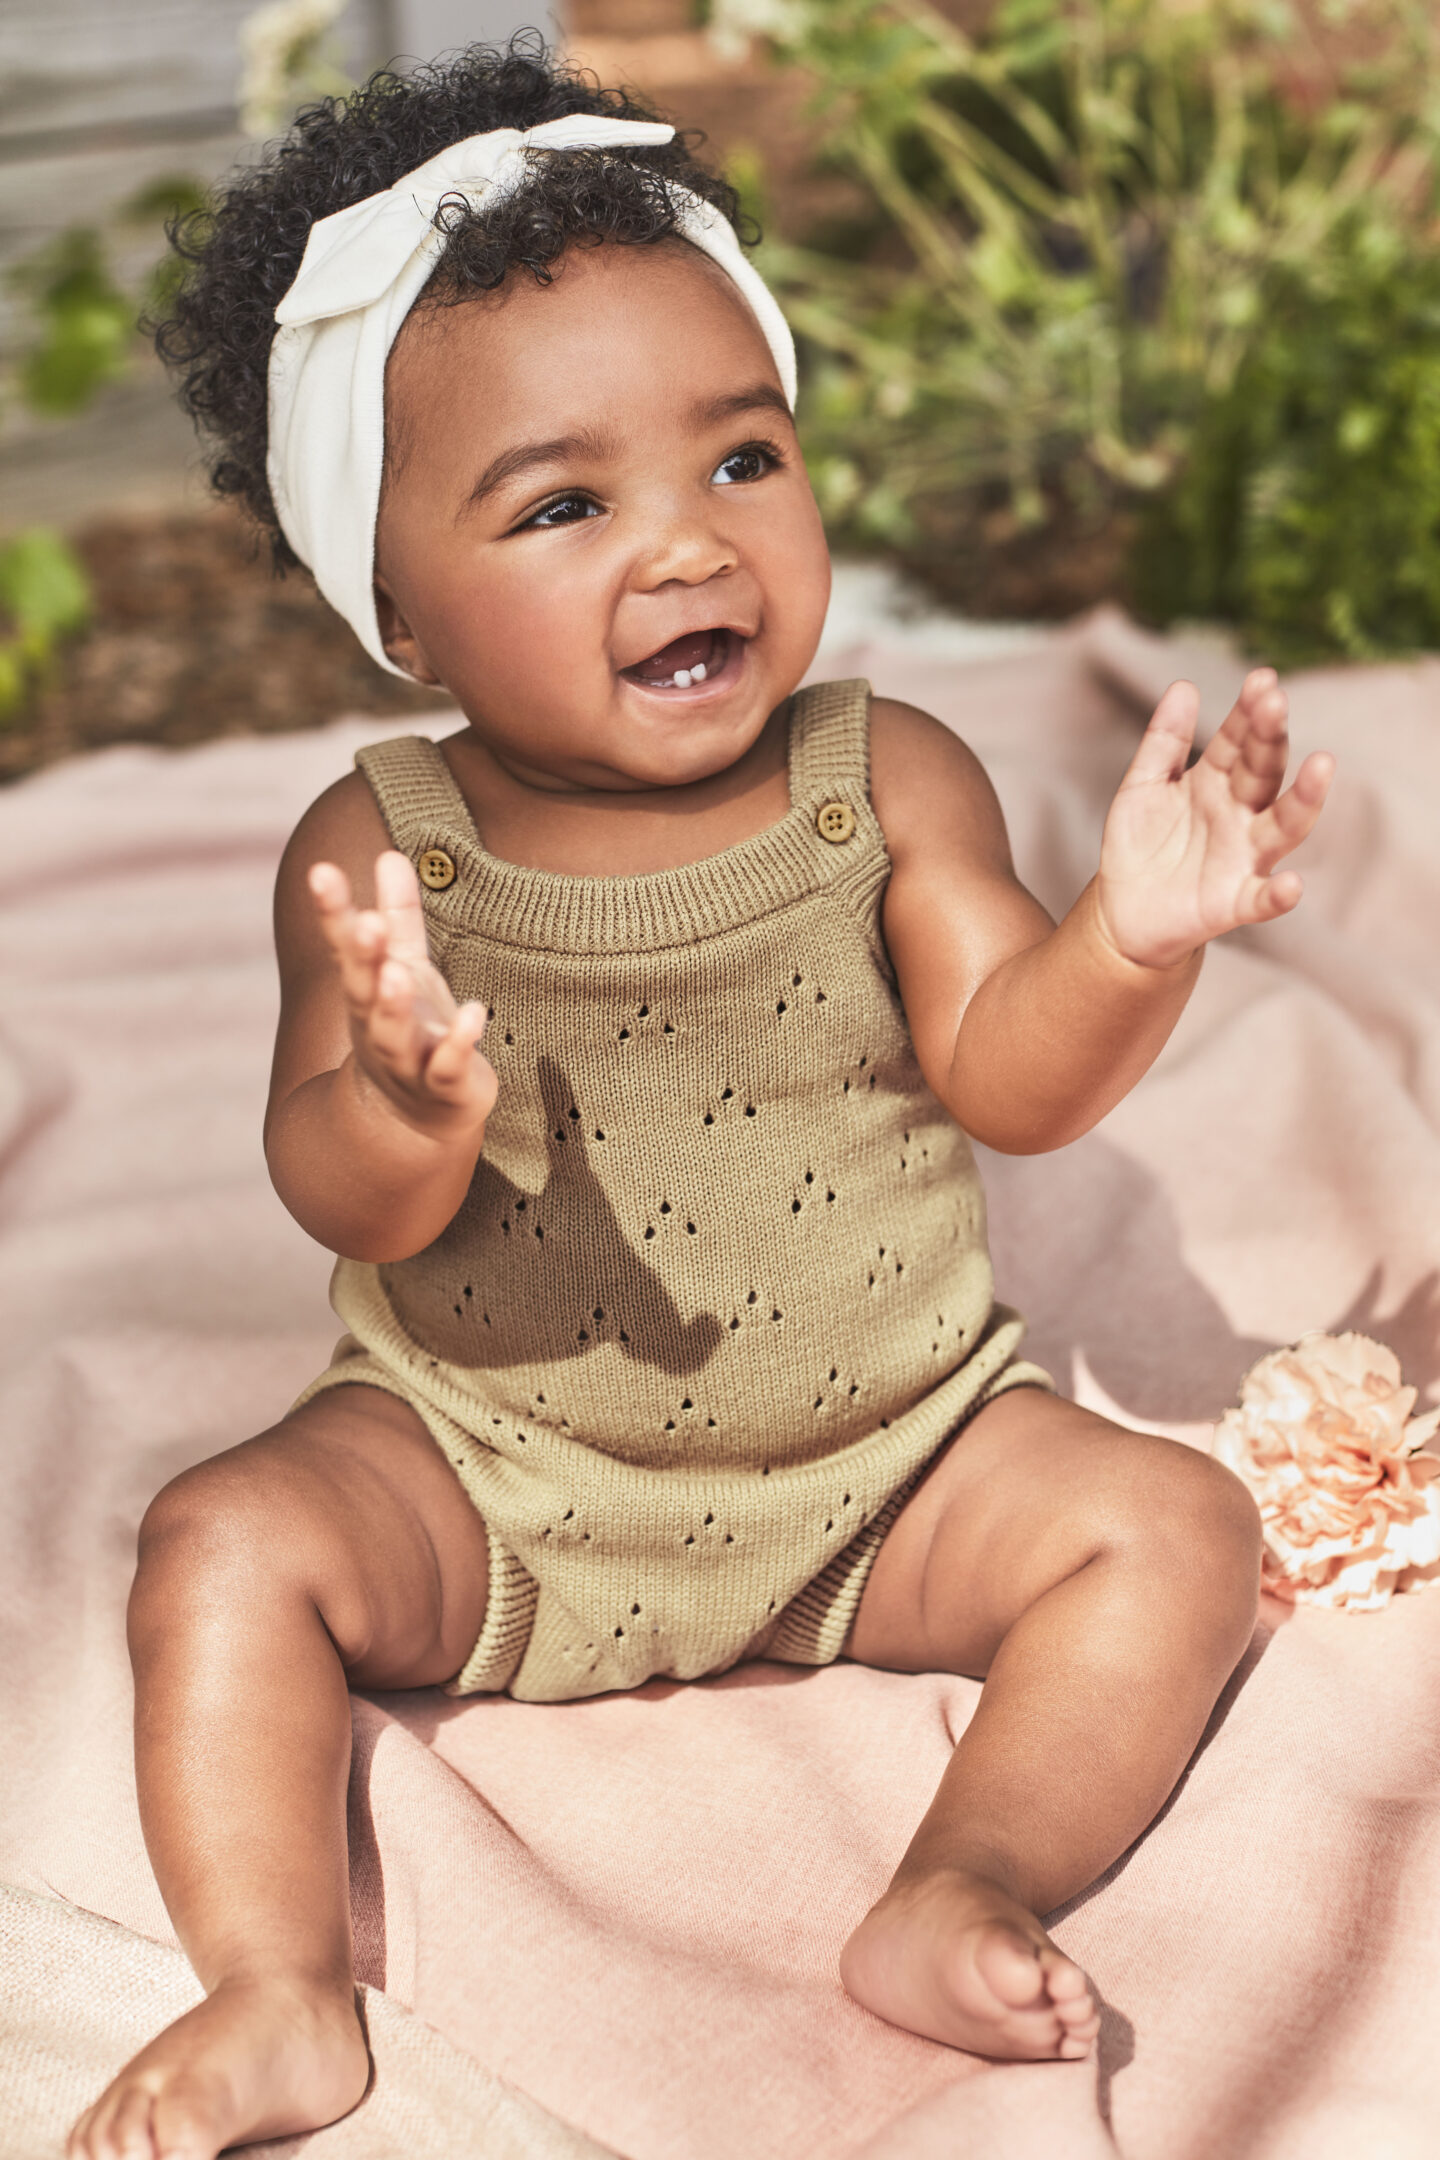 Sustainable Organic Baby Clothes EU